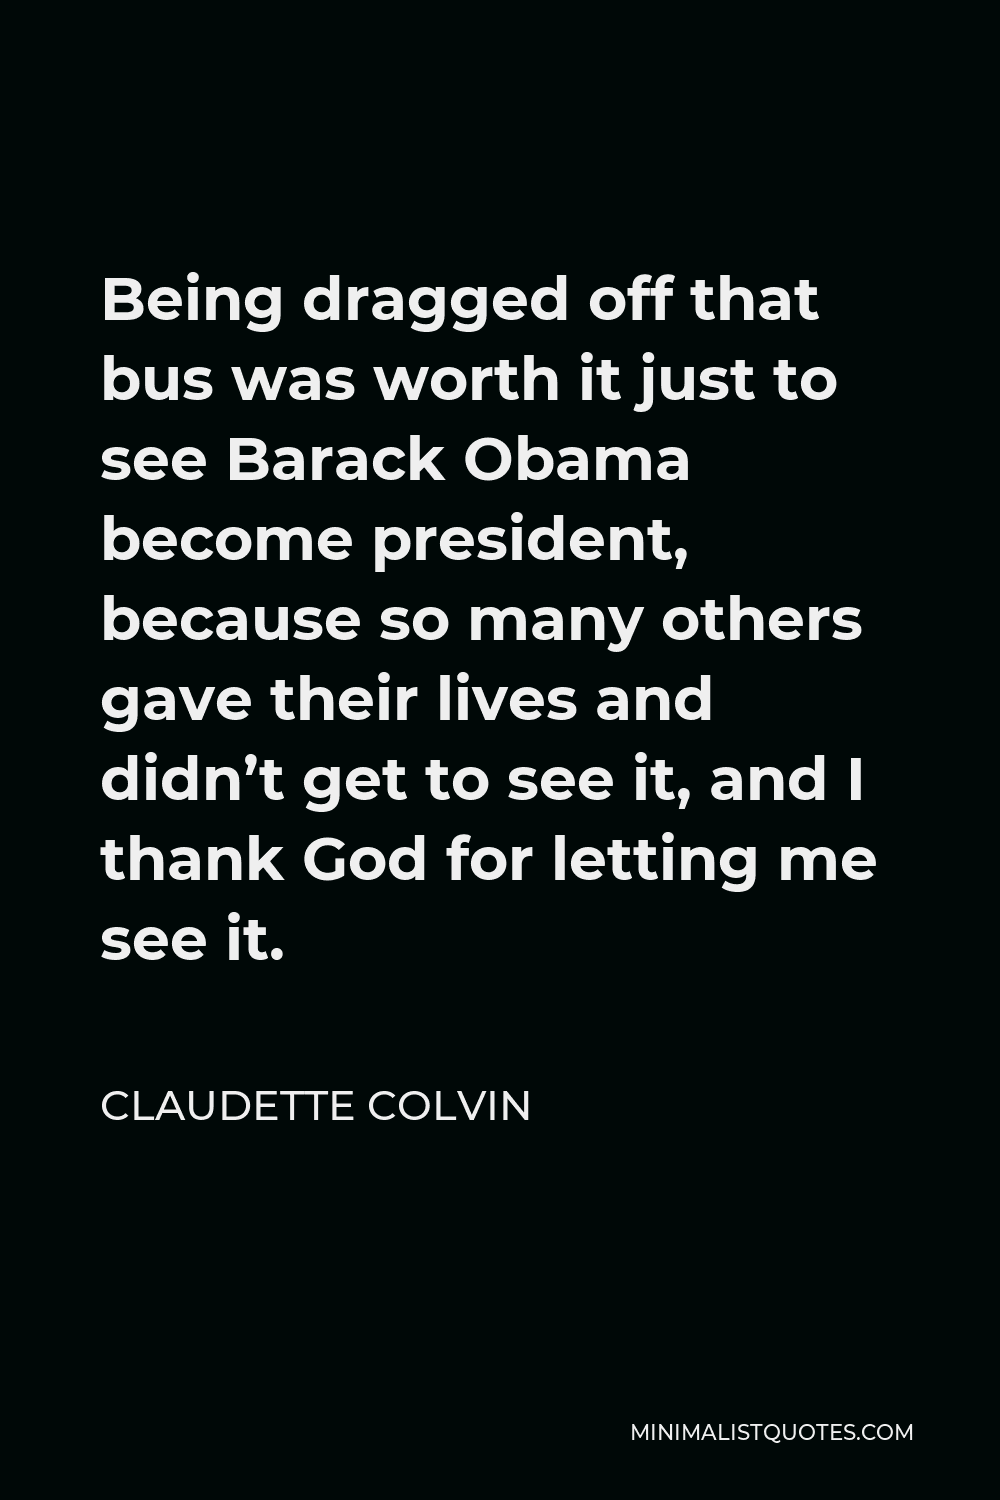 Claudette Colvin Quote - Being dragged off that bus was worth it just to see Barack Obama become president, because so many others gave their lives and didn’t get to see it, and I thank God for letting me see it.